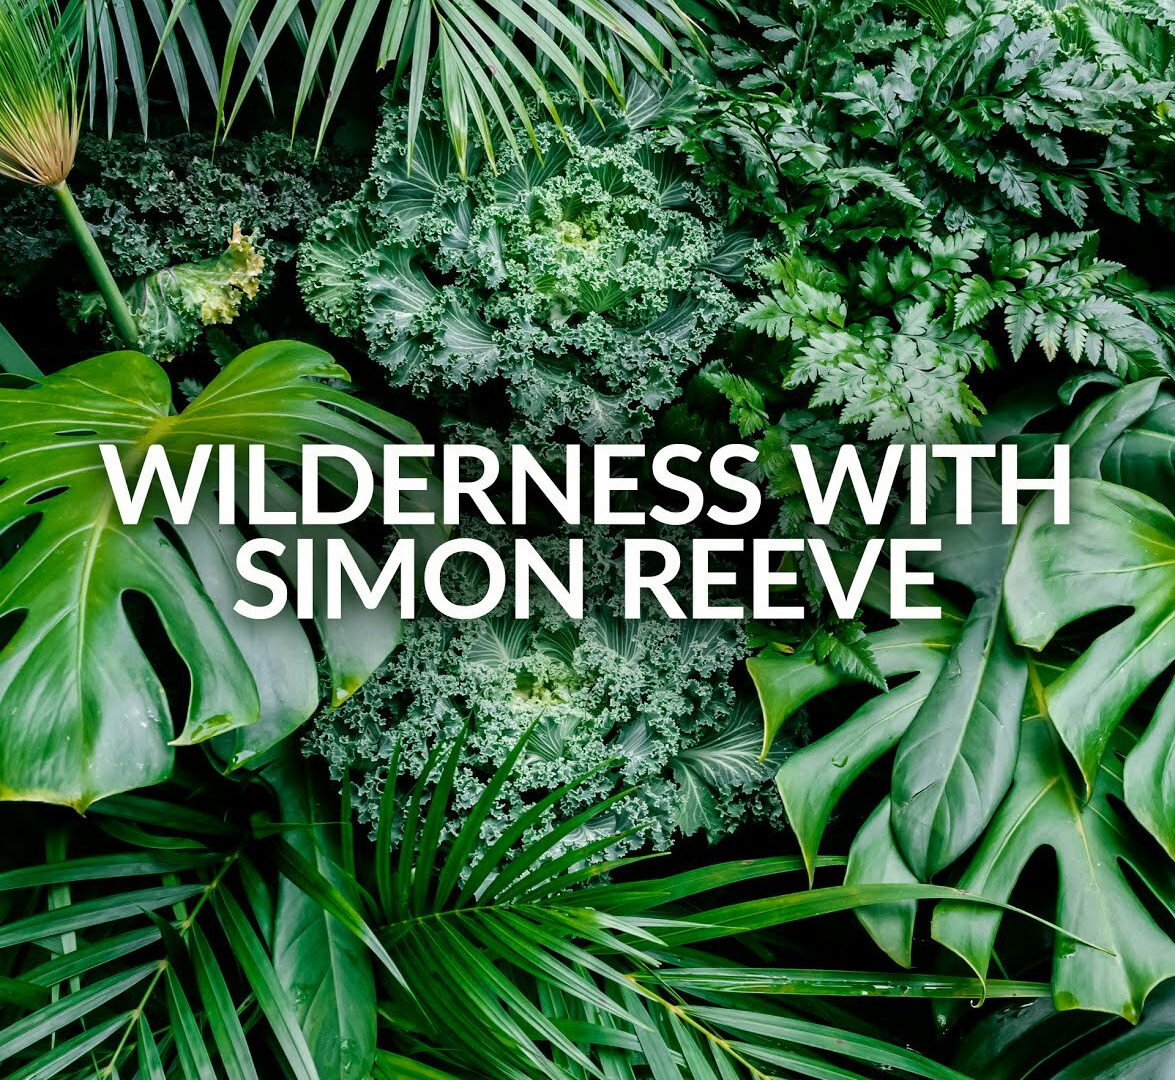 Show Wilderness with Simon Reeve